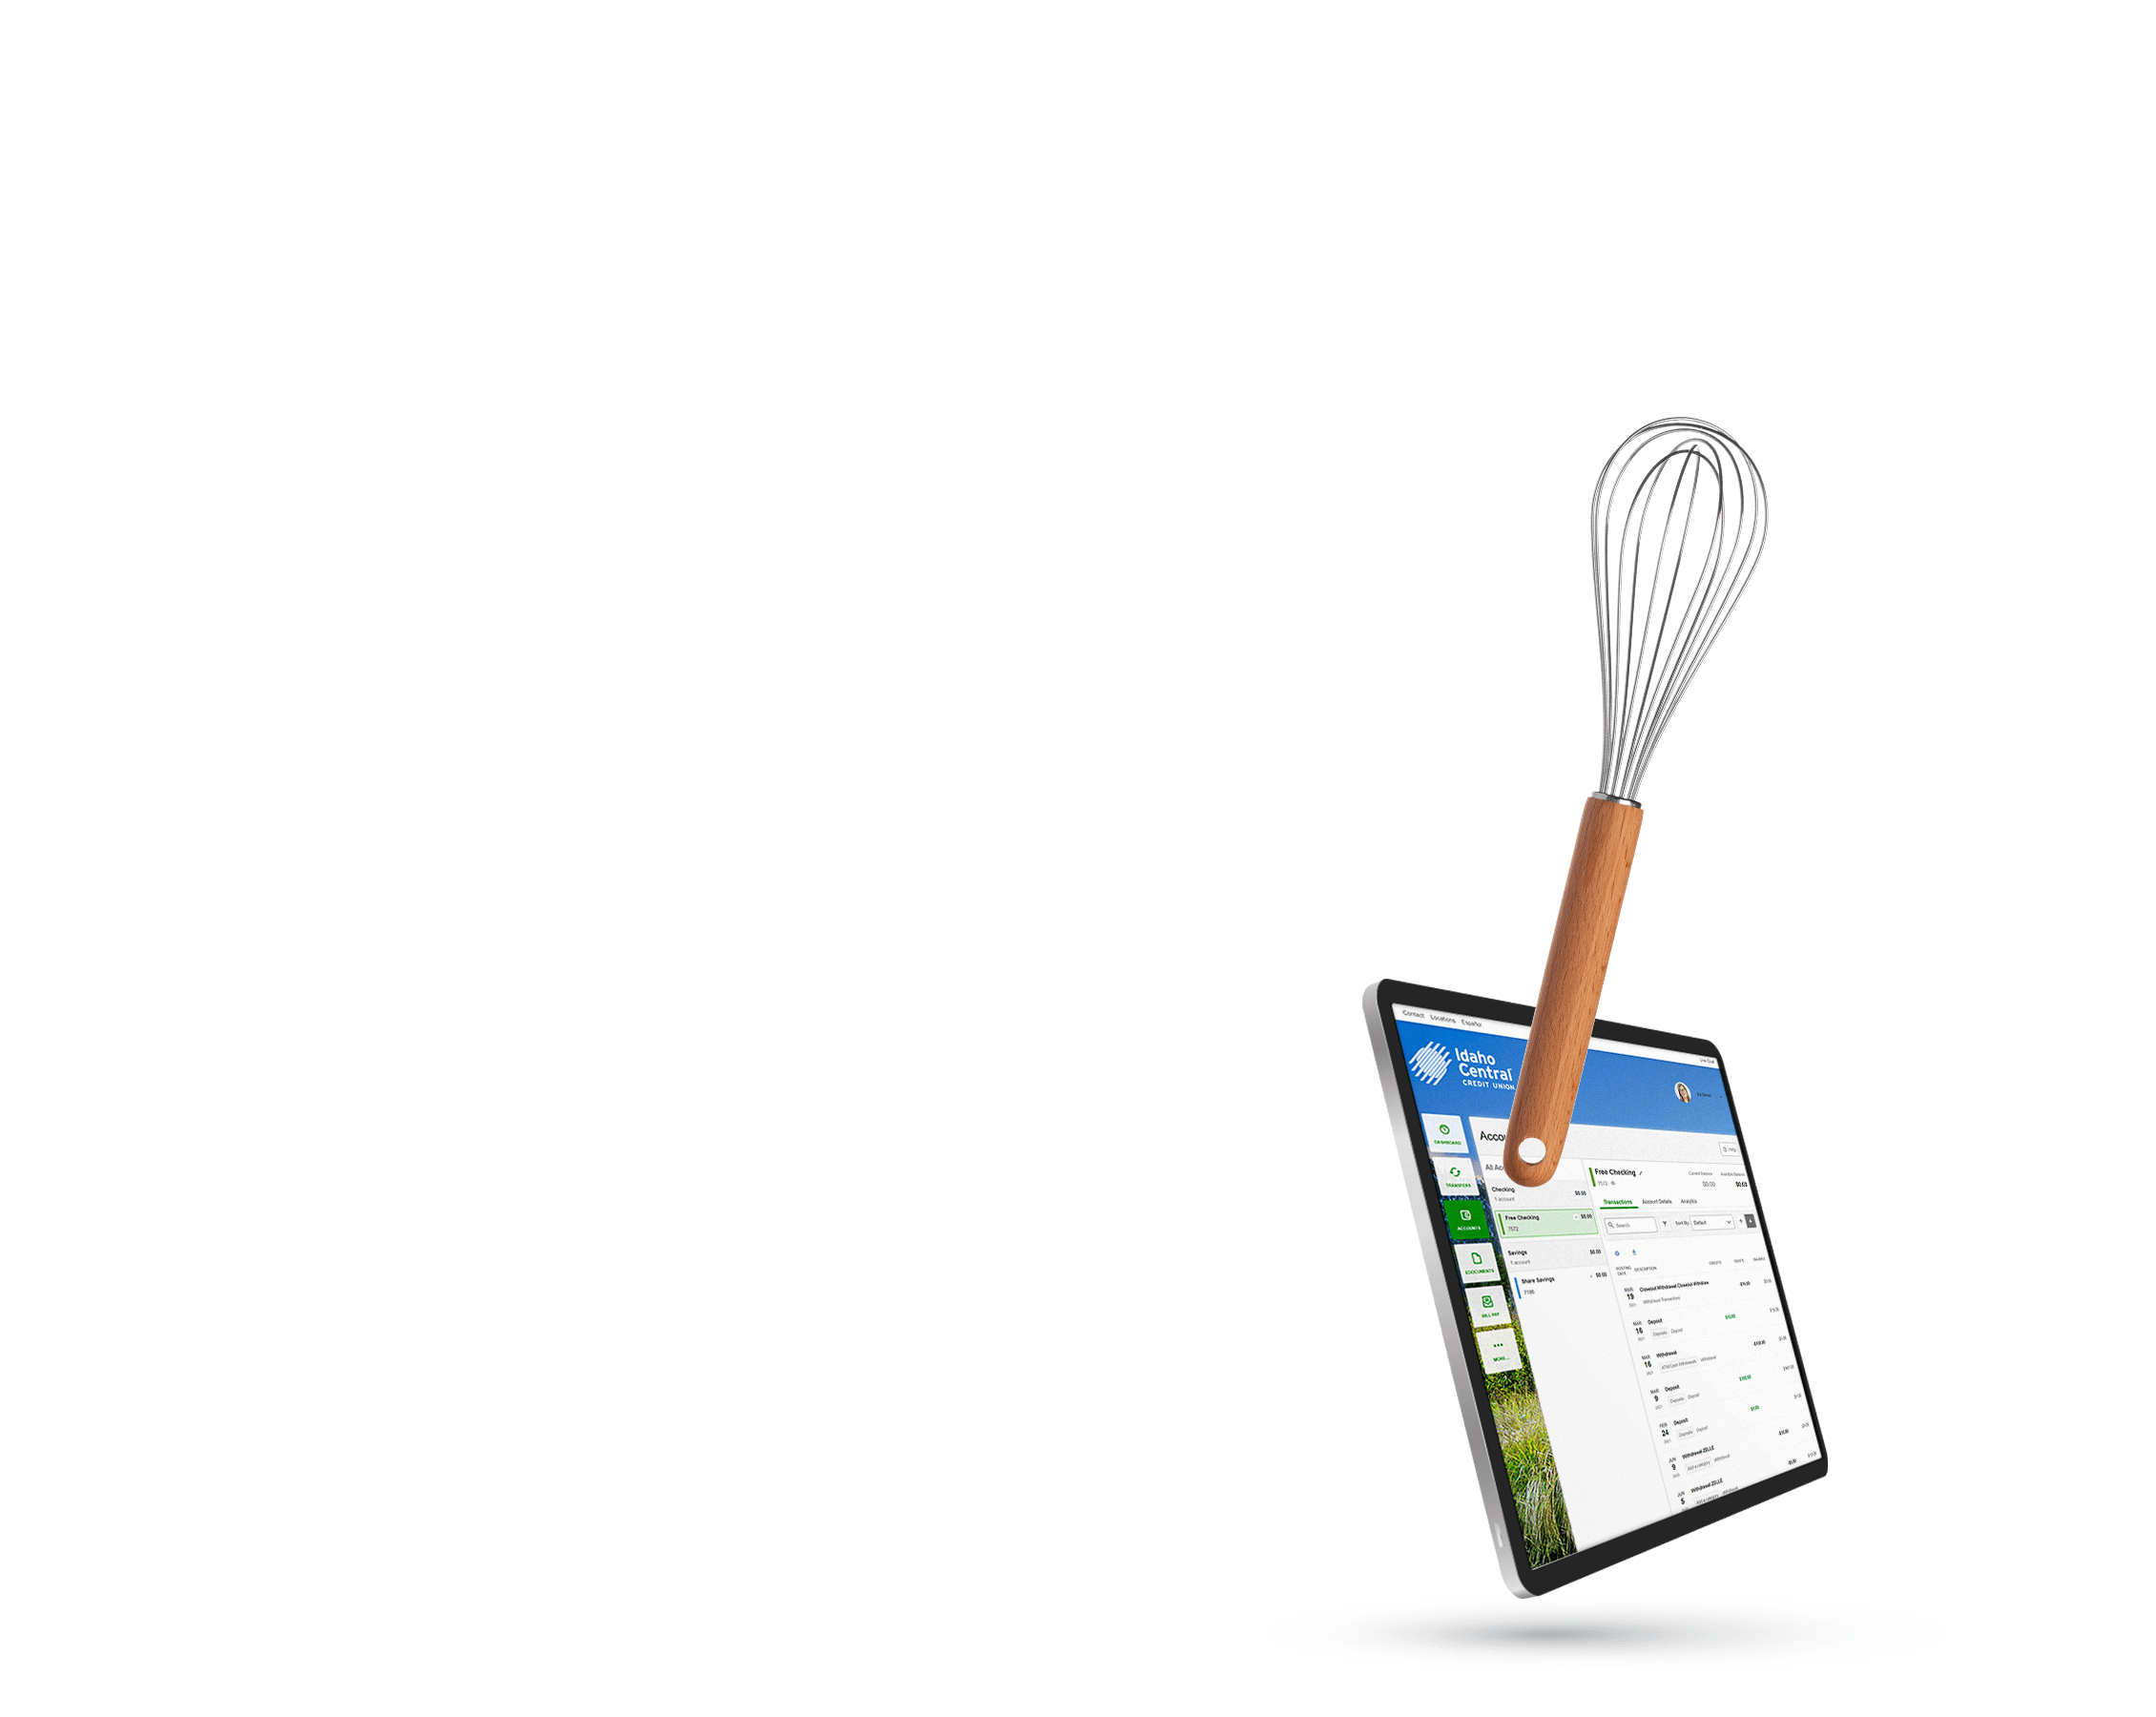 Floating objects, tablet with ICCU mobile banking interface and a whisk